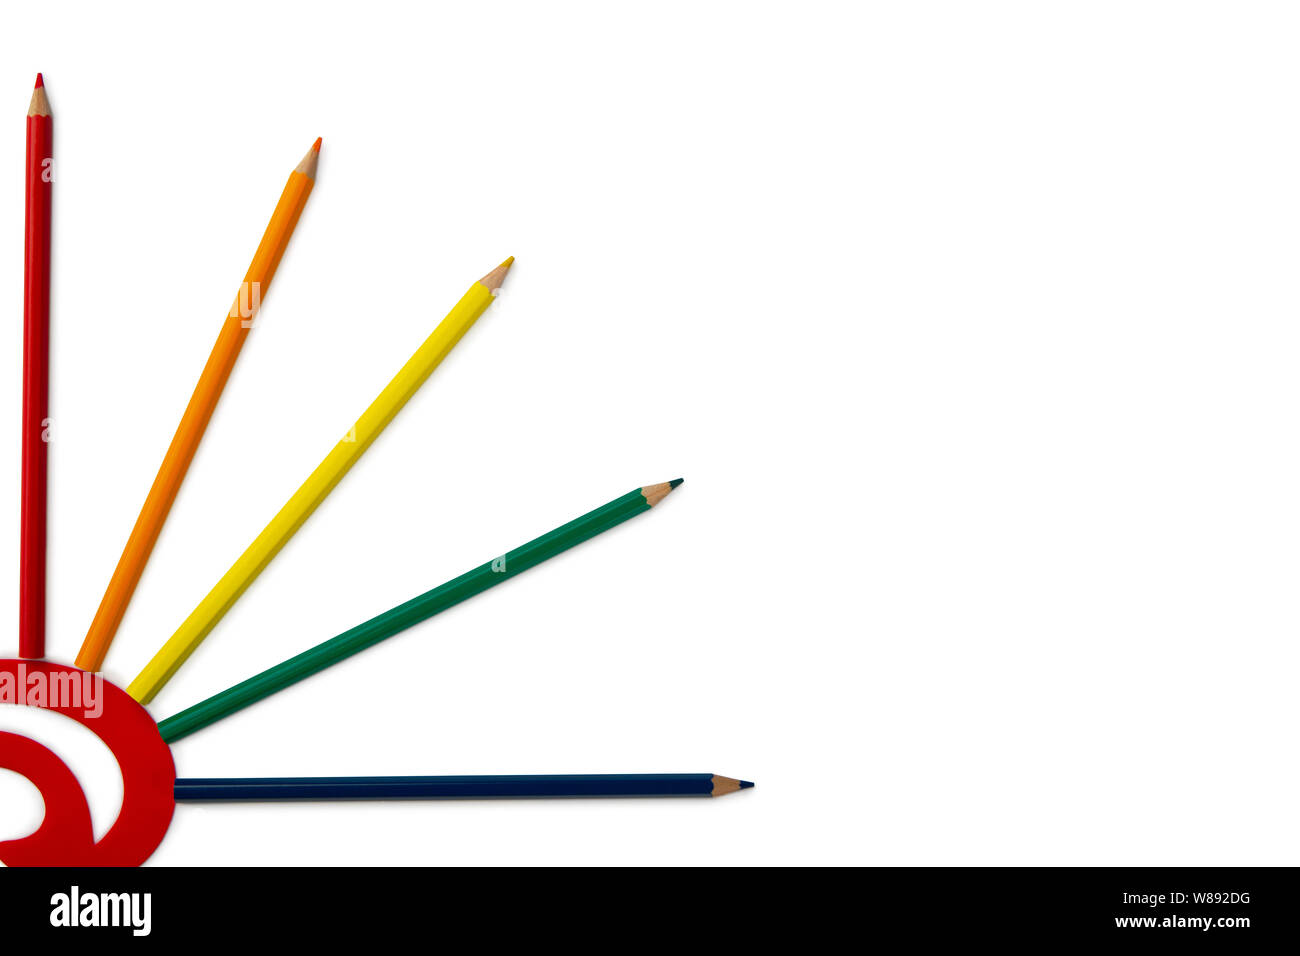 Five color pencils on white background Stock Photo